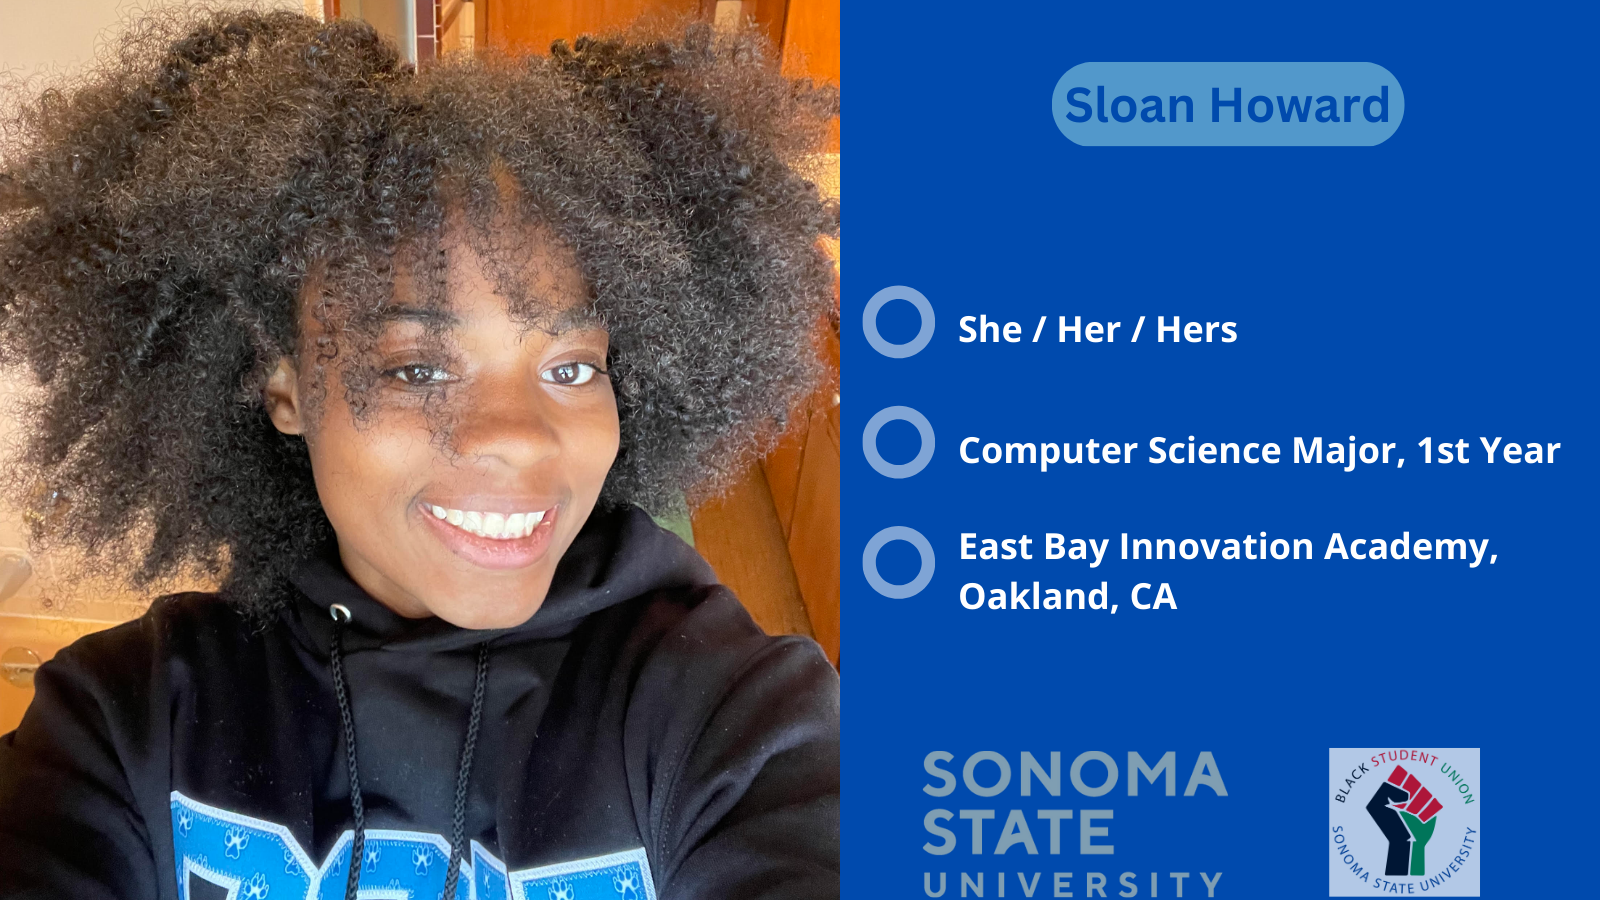 Sloan Howard Computer Science, Class of 2026. Home town: Oakland/East Bay Innovation Academy.